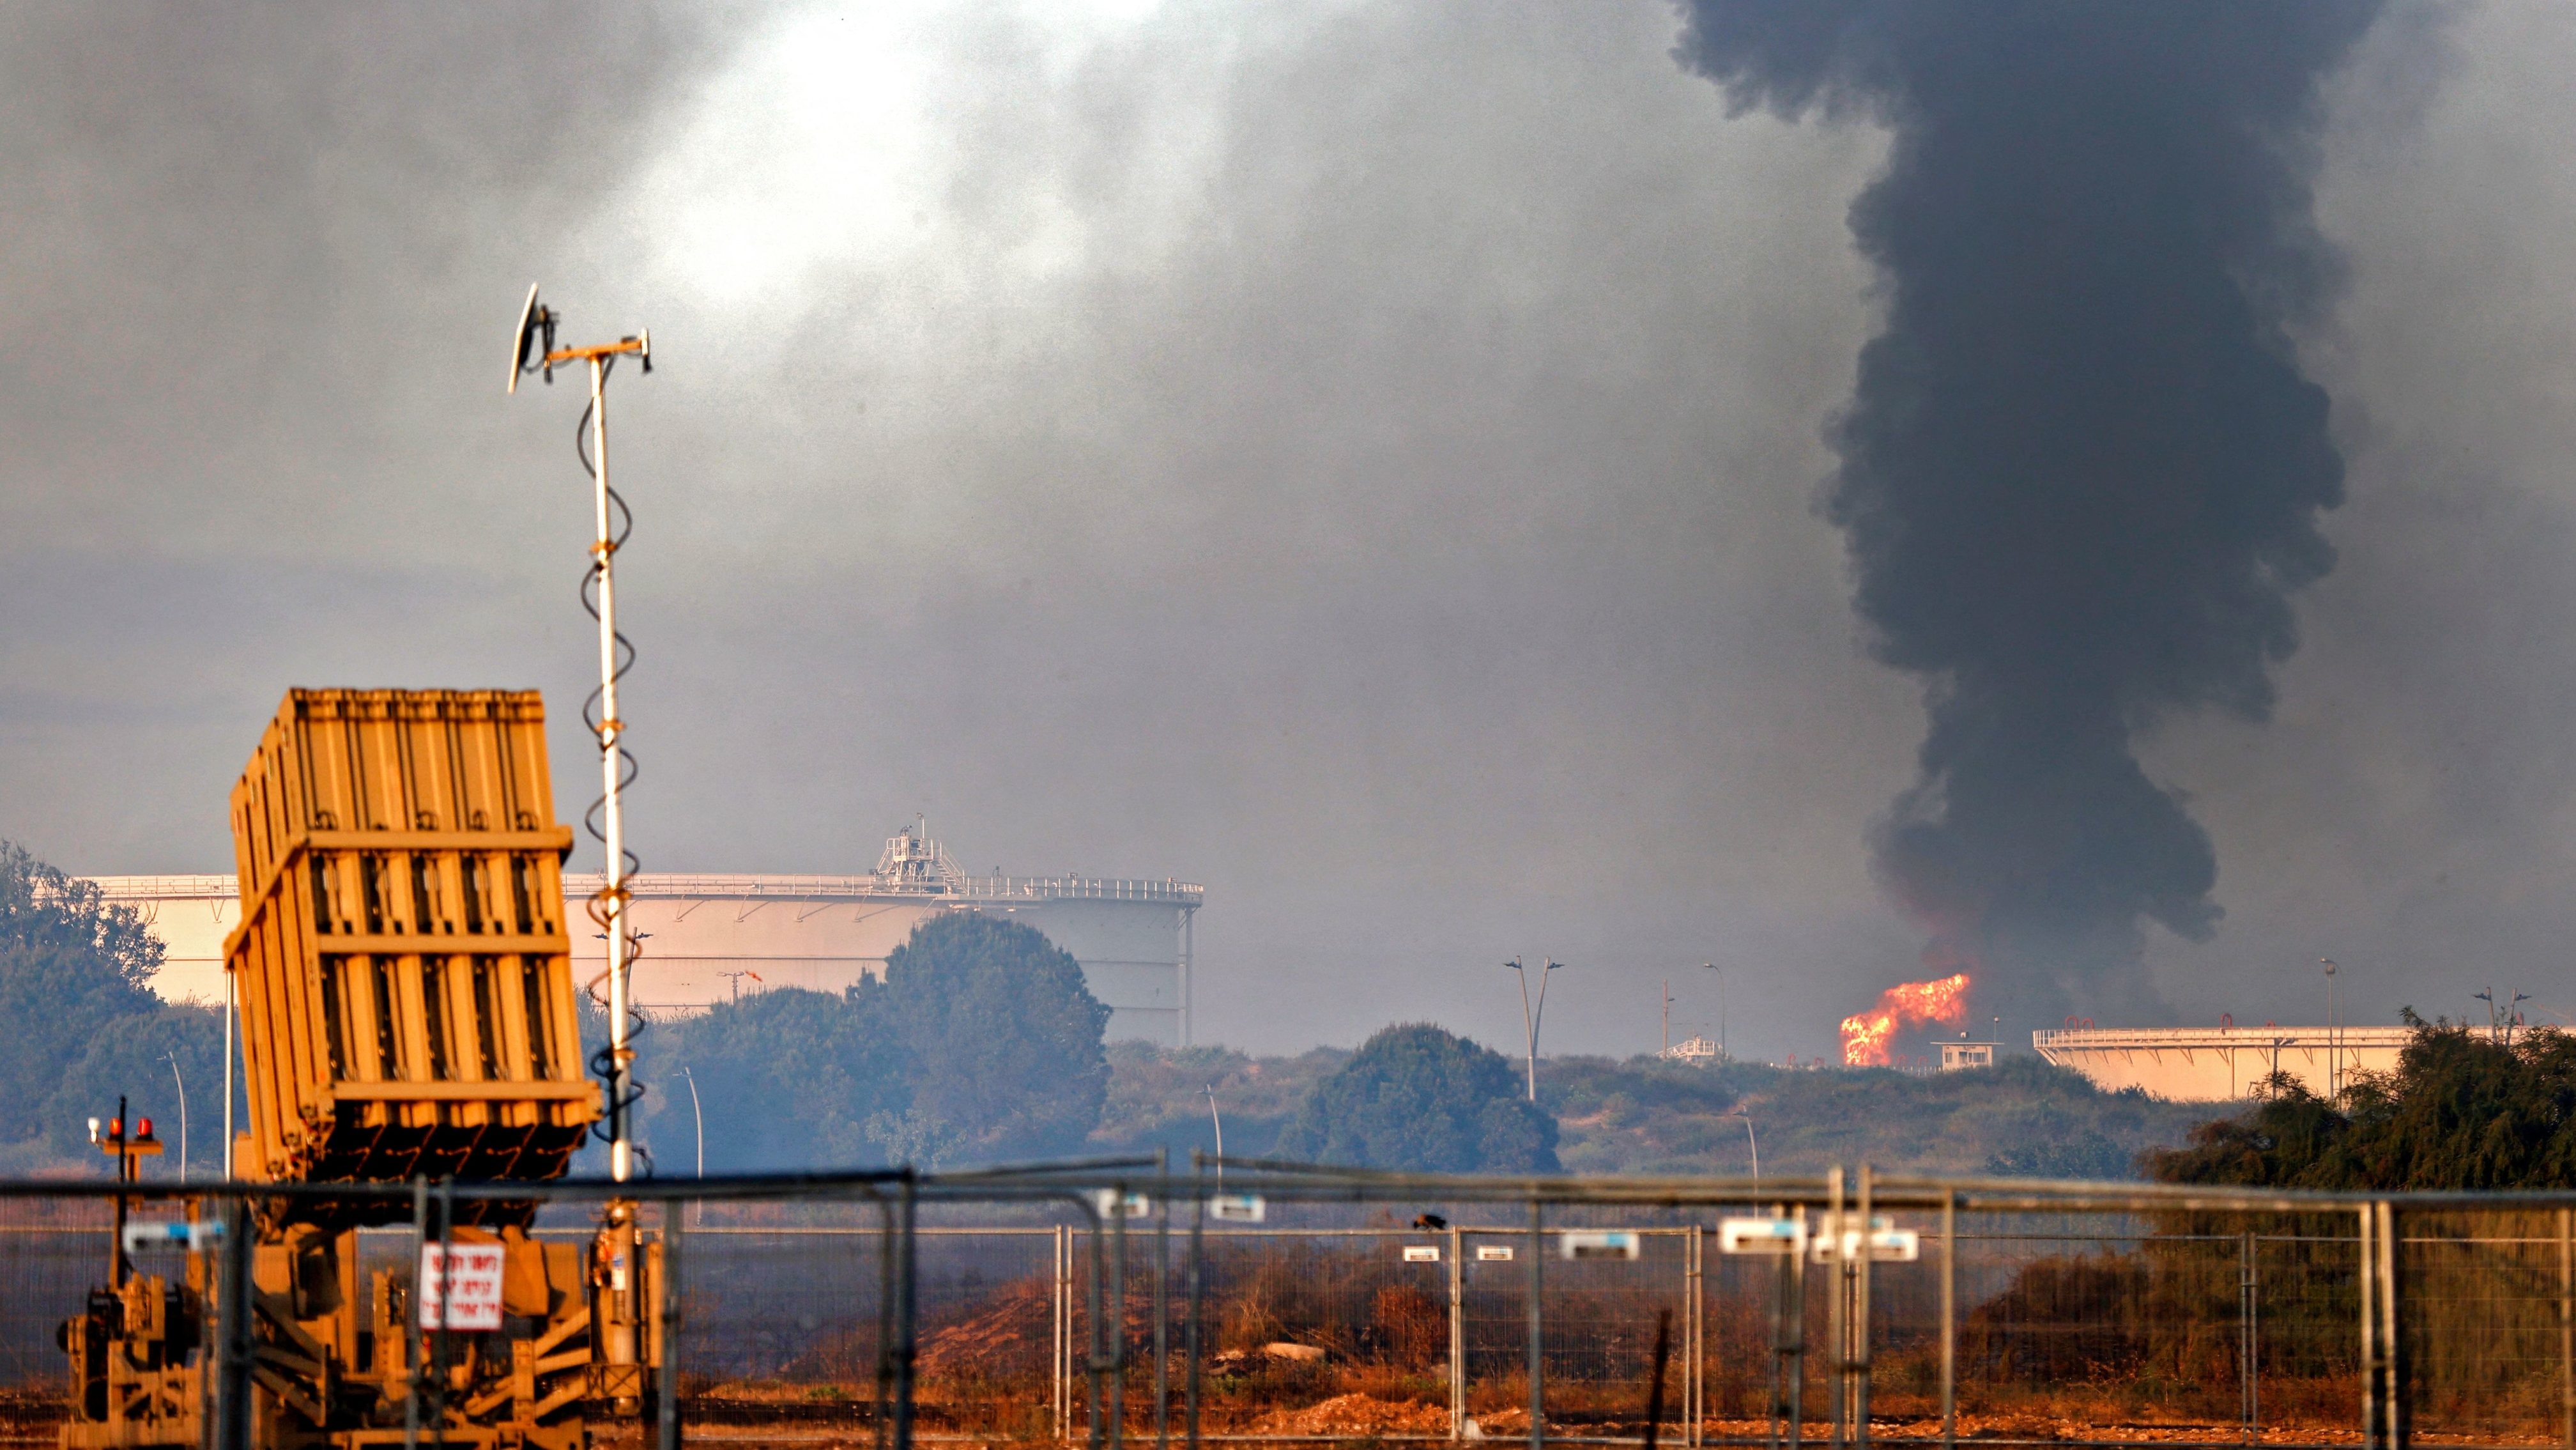 PALESTINIAN-ISRAEL-CONFLICT-REFINERY